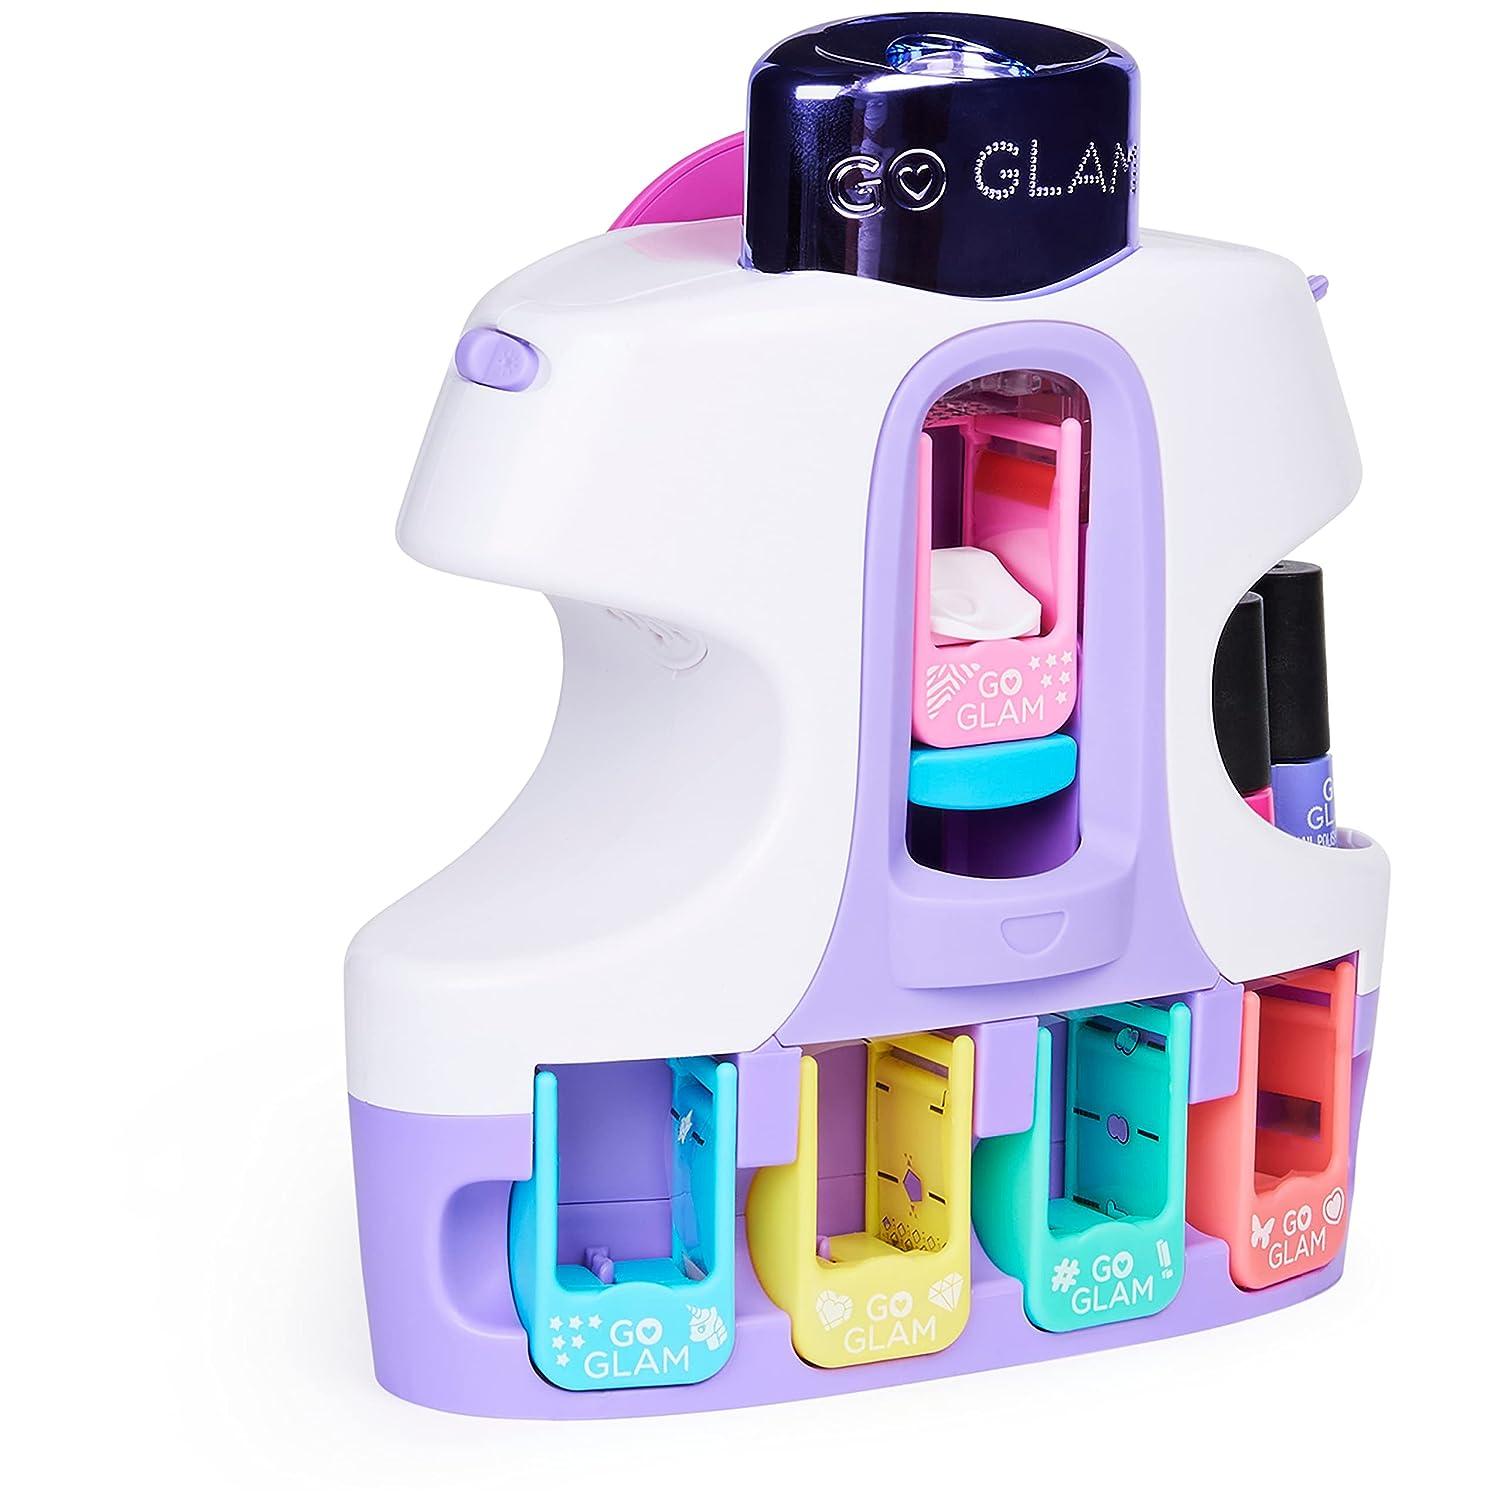 Best Nail Art Machines – Our Top 10 Picks